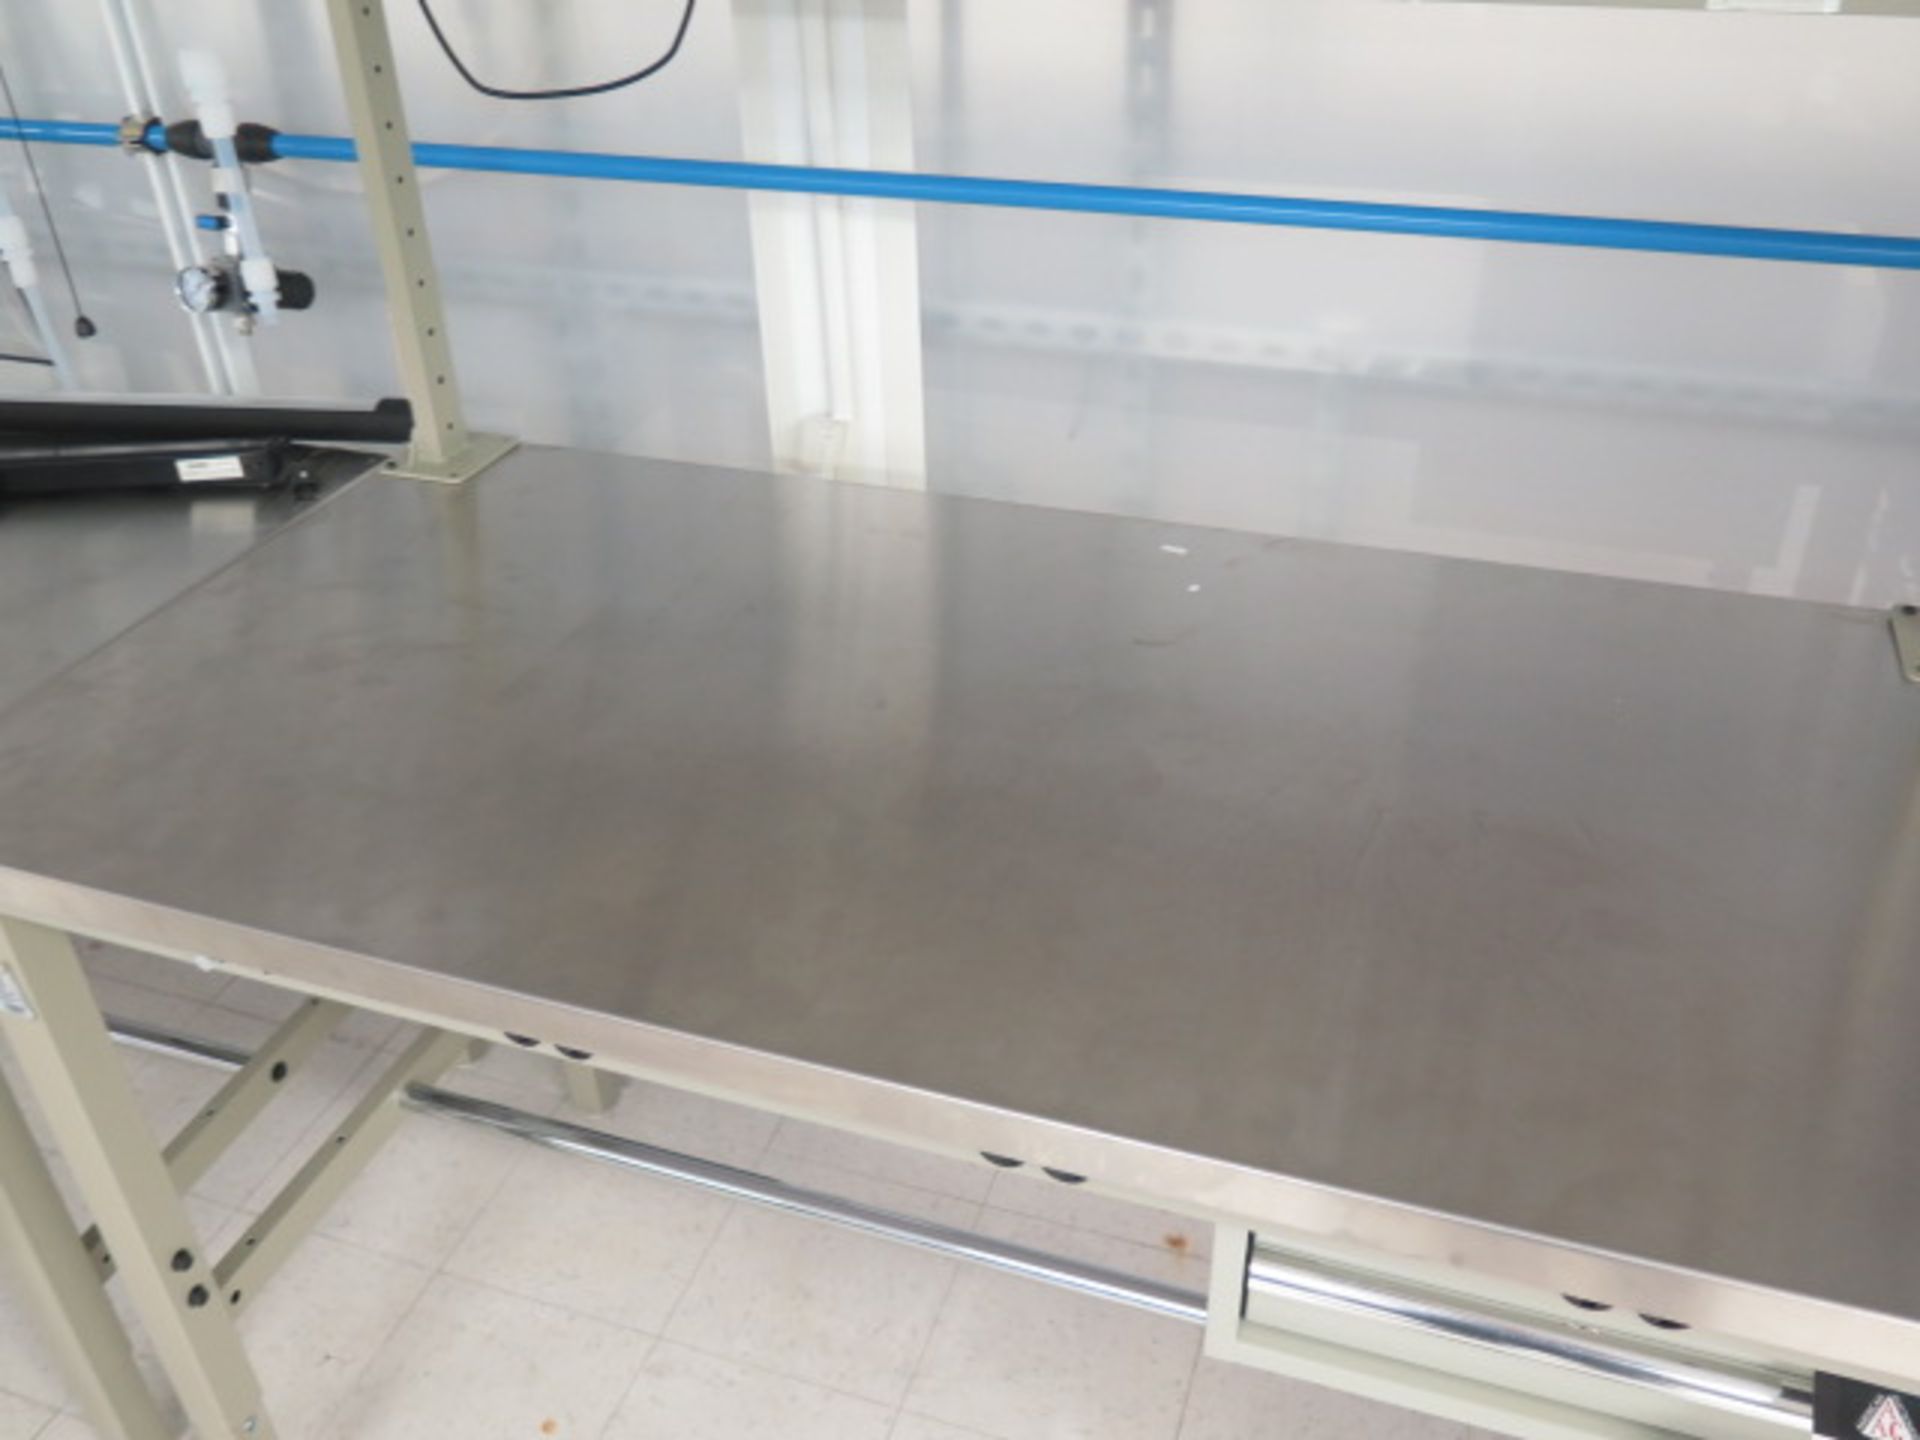 Global 30" x 60" Stainless Top Lab Benches (2) w/ Back-Boards and Lights (SOLD AS-IS - NO WARRANTY) - Image 6 of 11